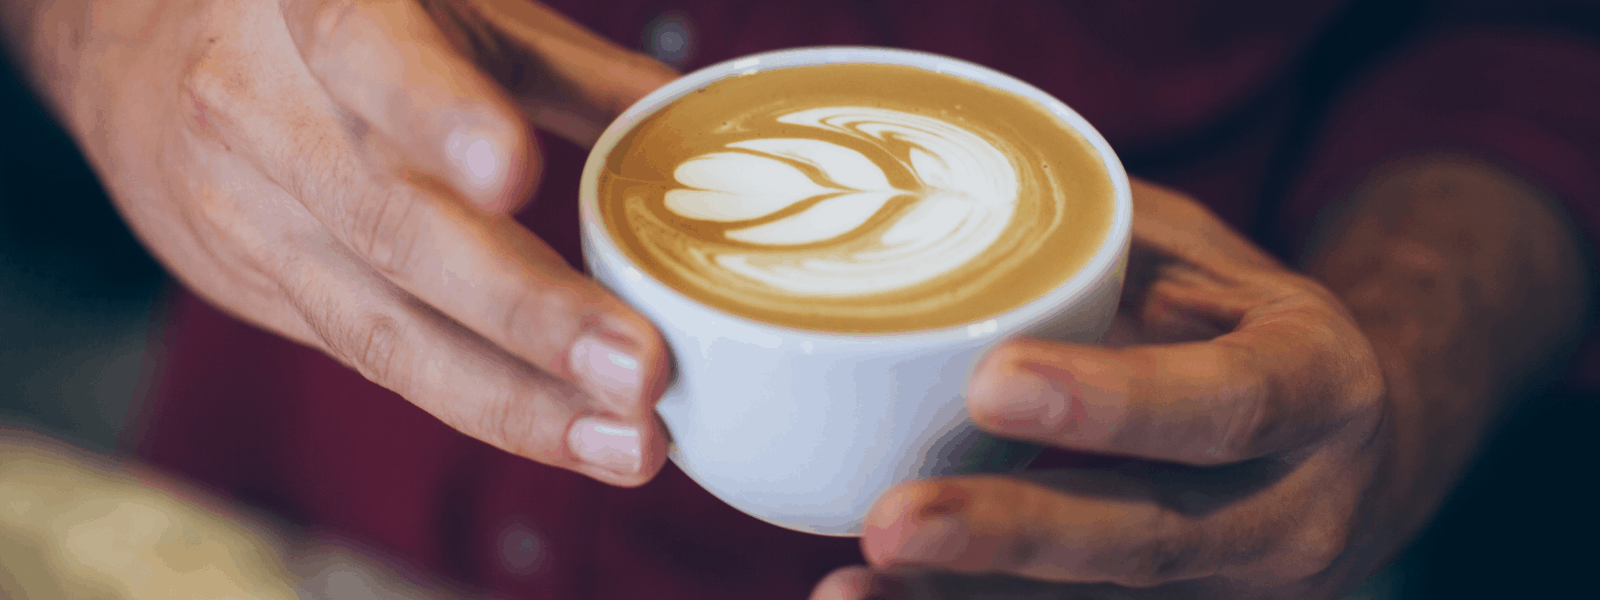 How to Froth Coffee Creamer for a Perfect Home Latte